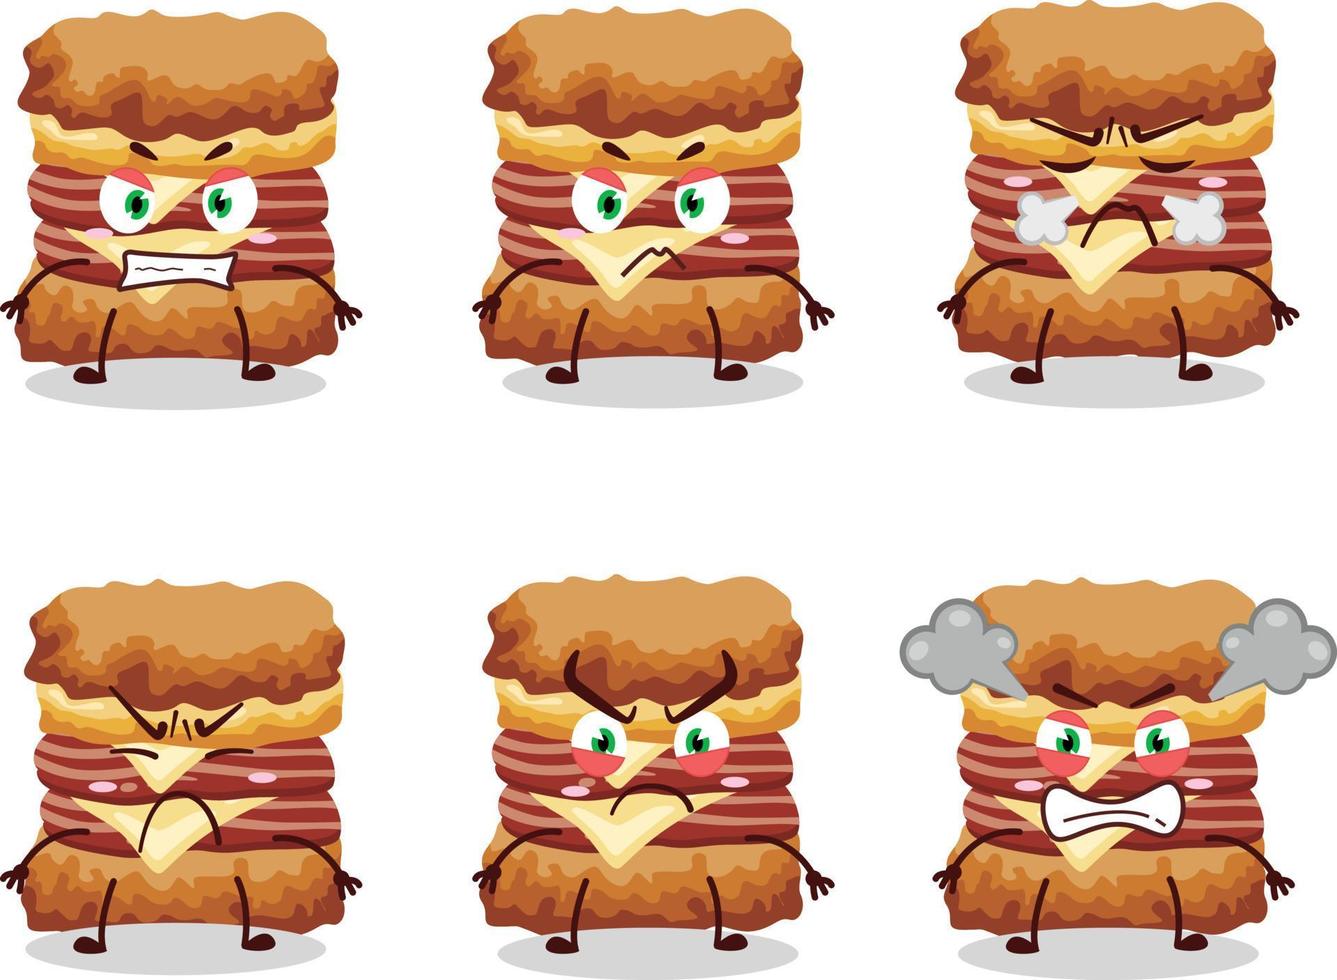 Chicken sandwich cartoon character with various angry expressions vector